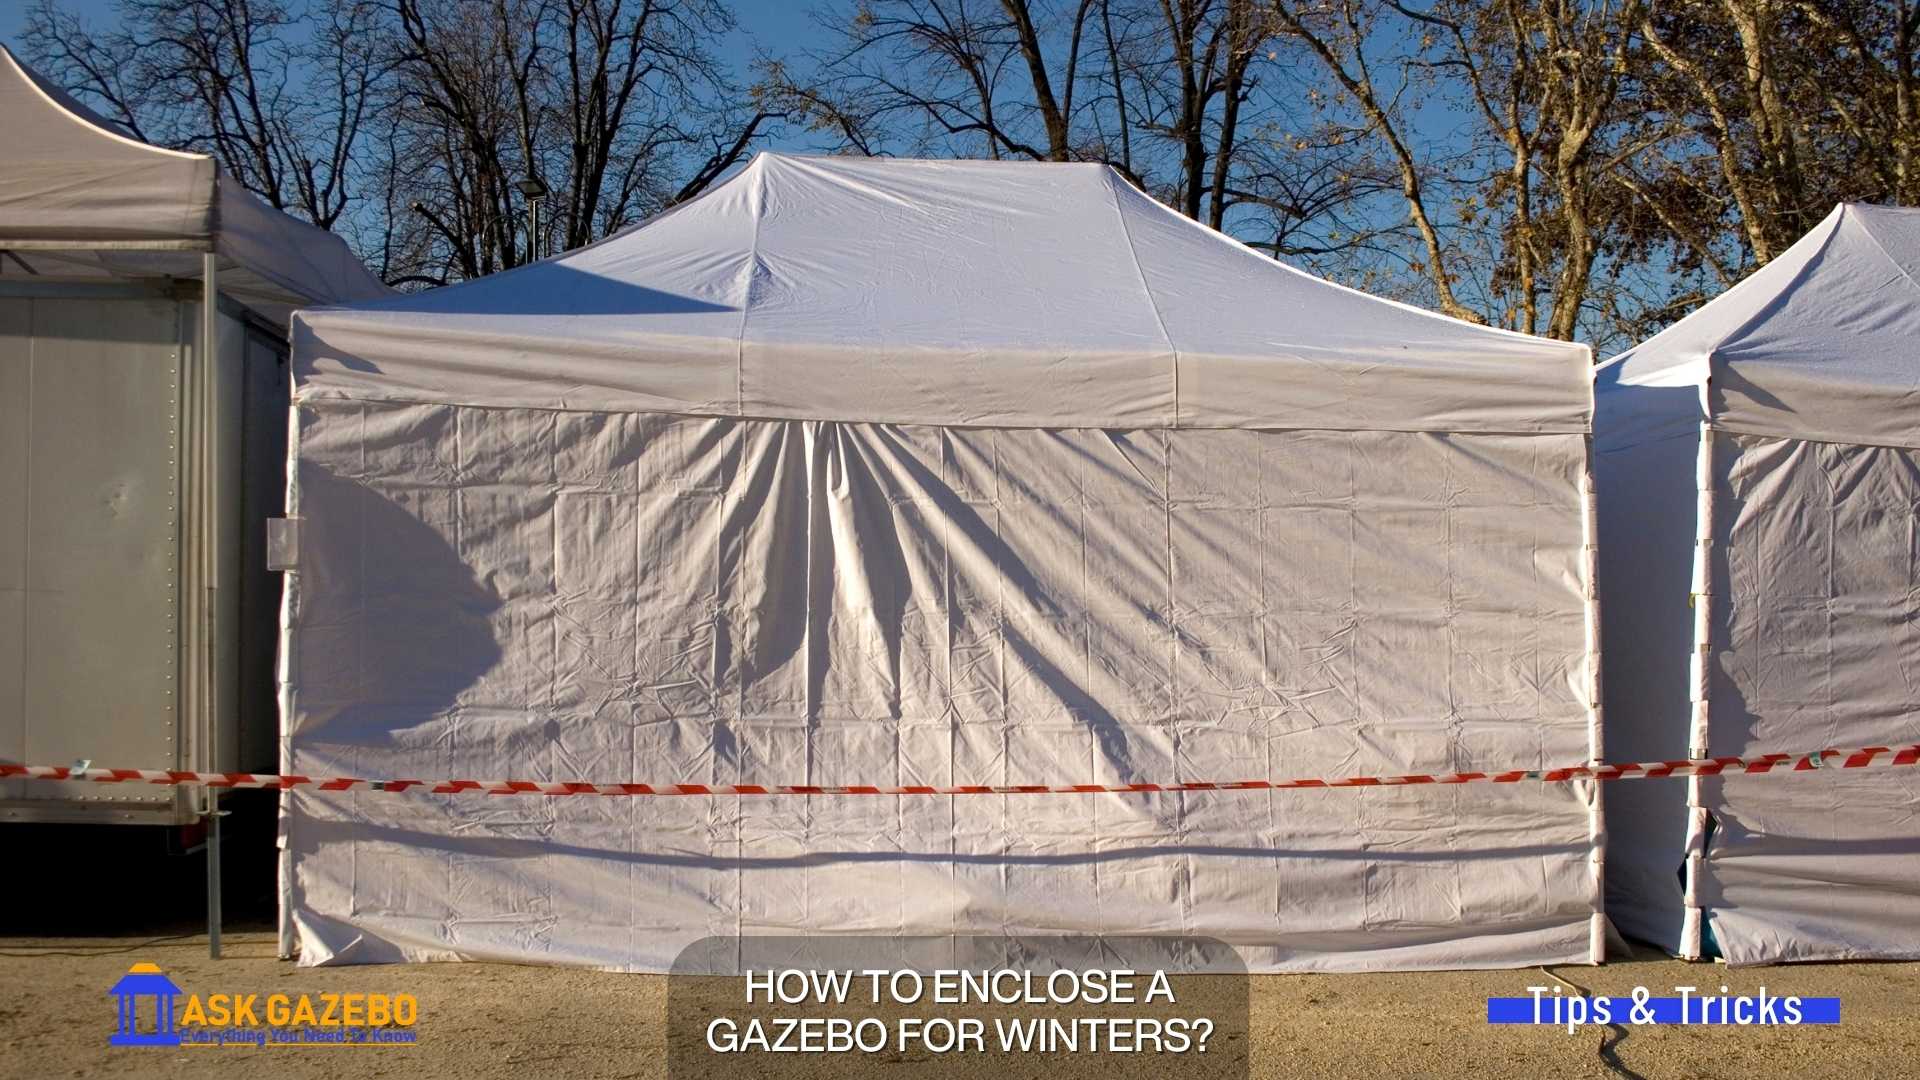 How To Enclose A Gazebo For Winters